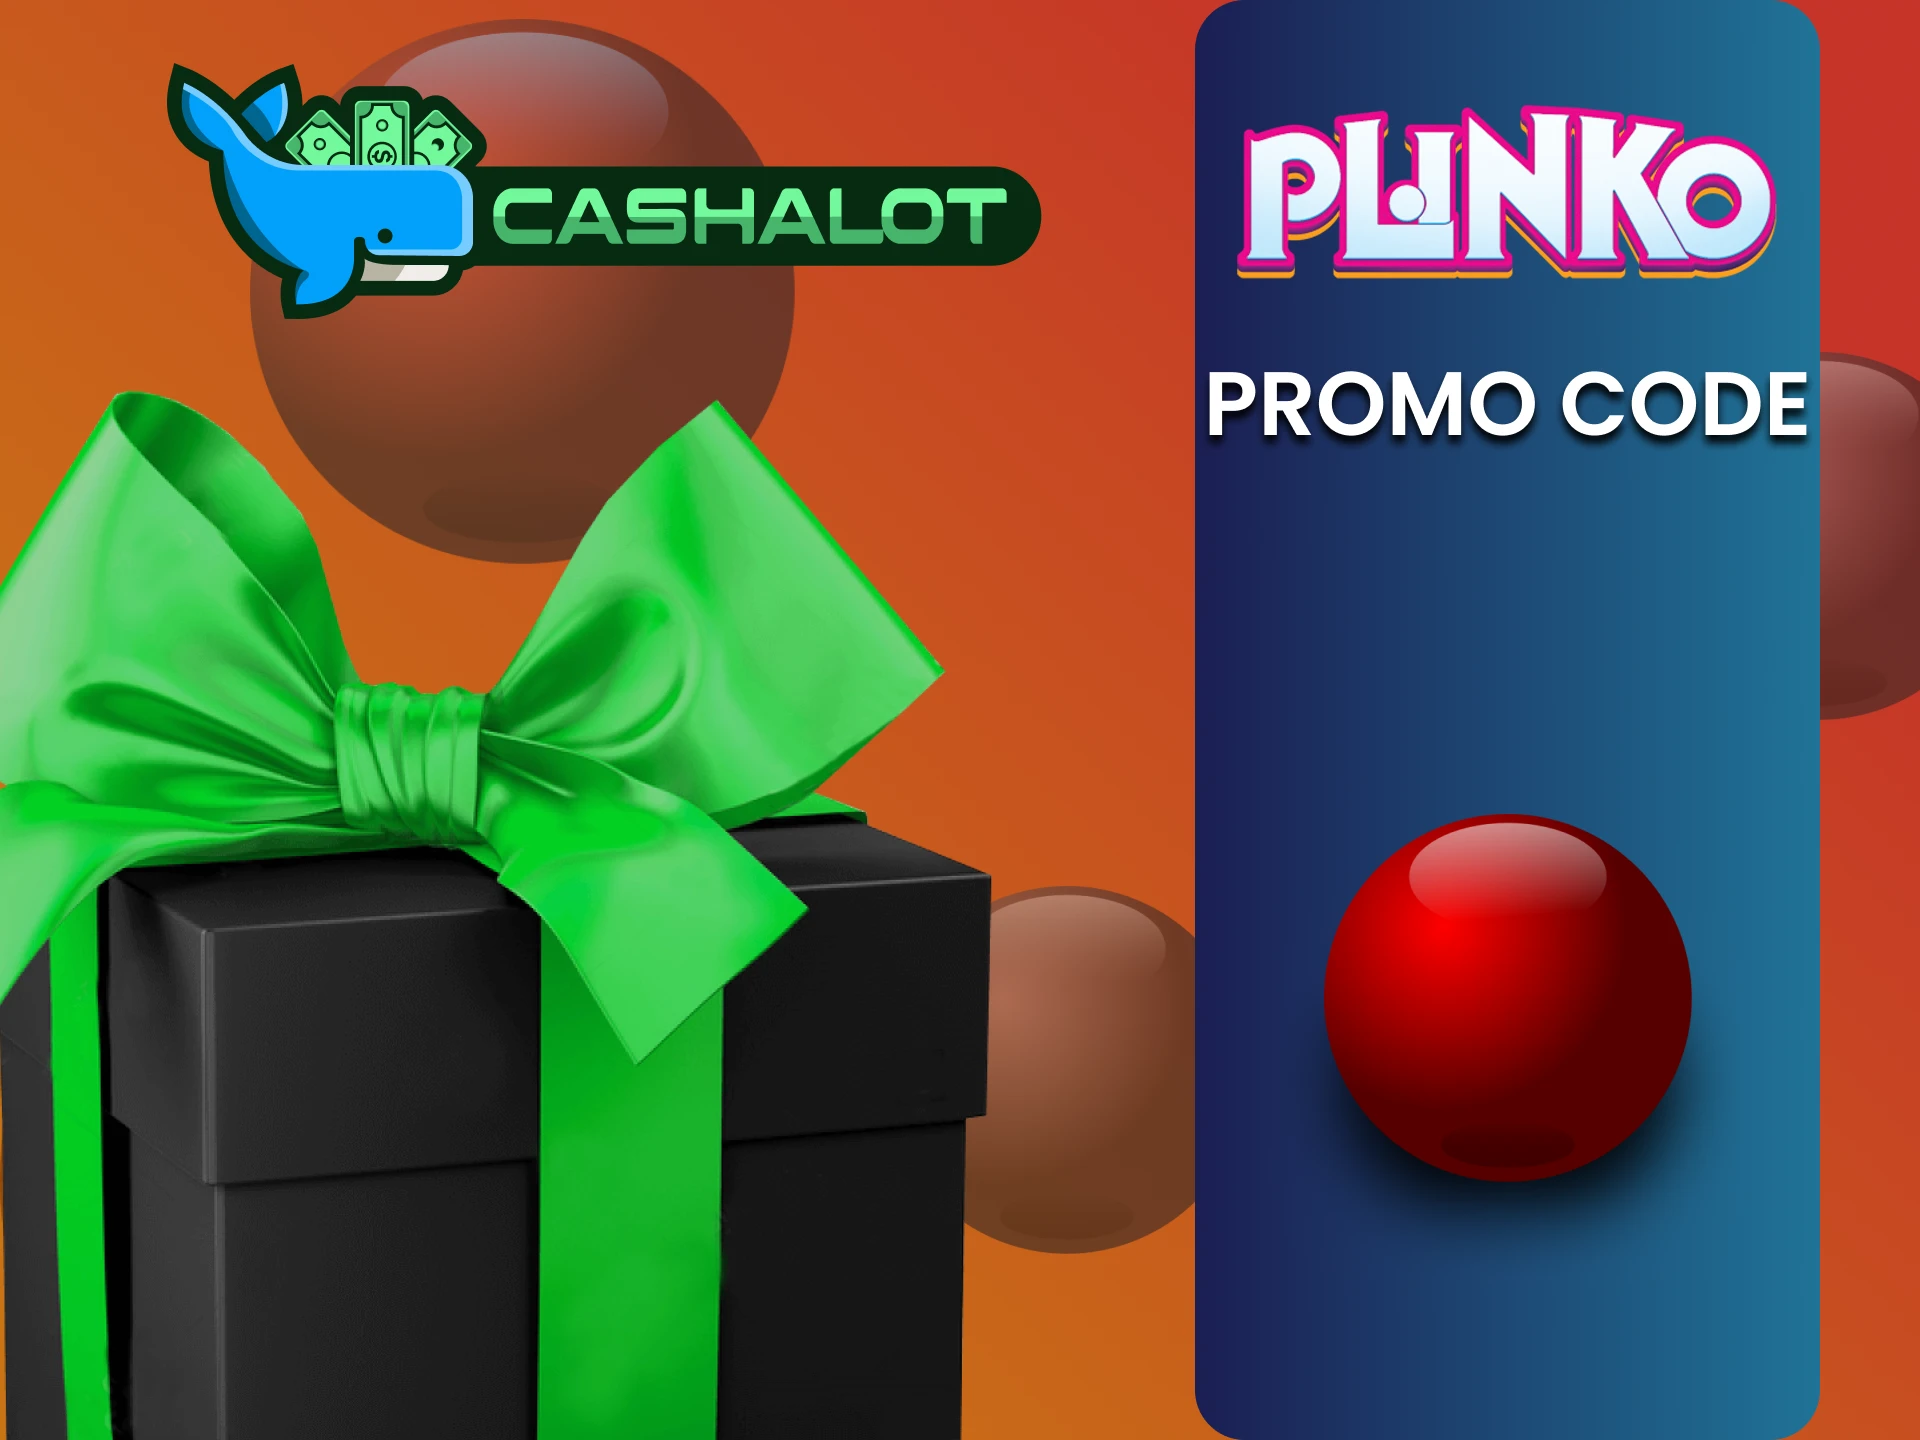 Use promo code from Cashalot to play Plinko.